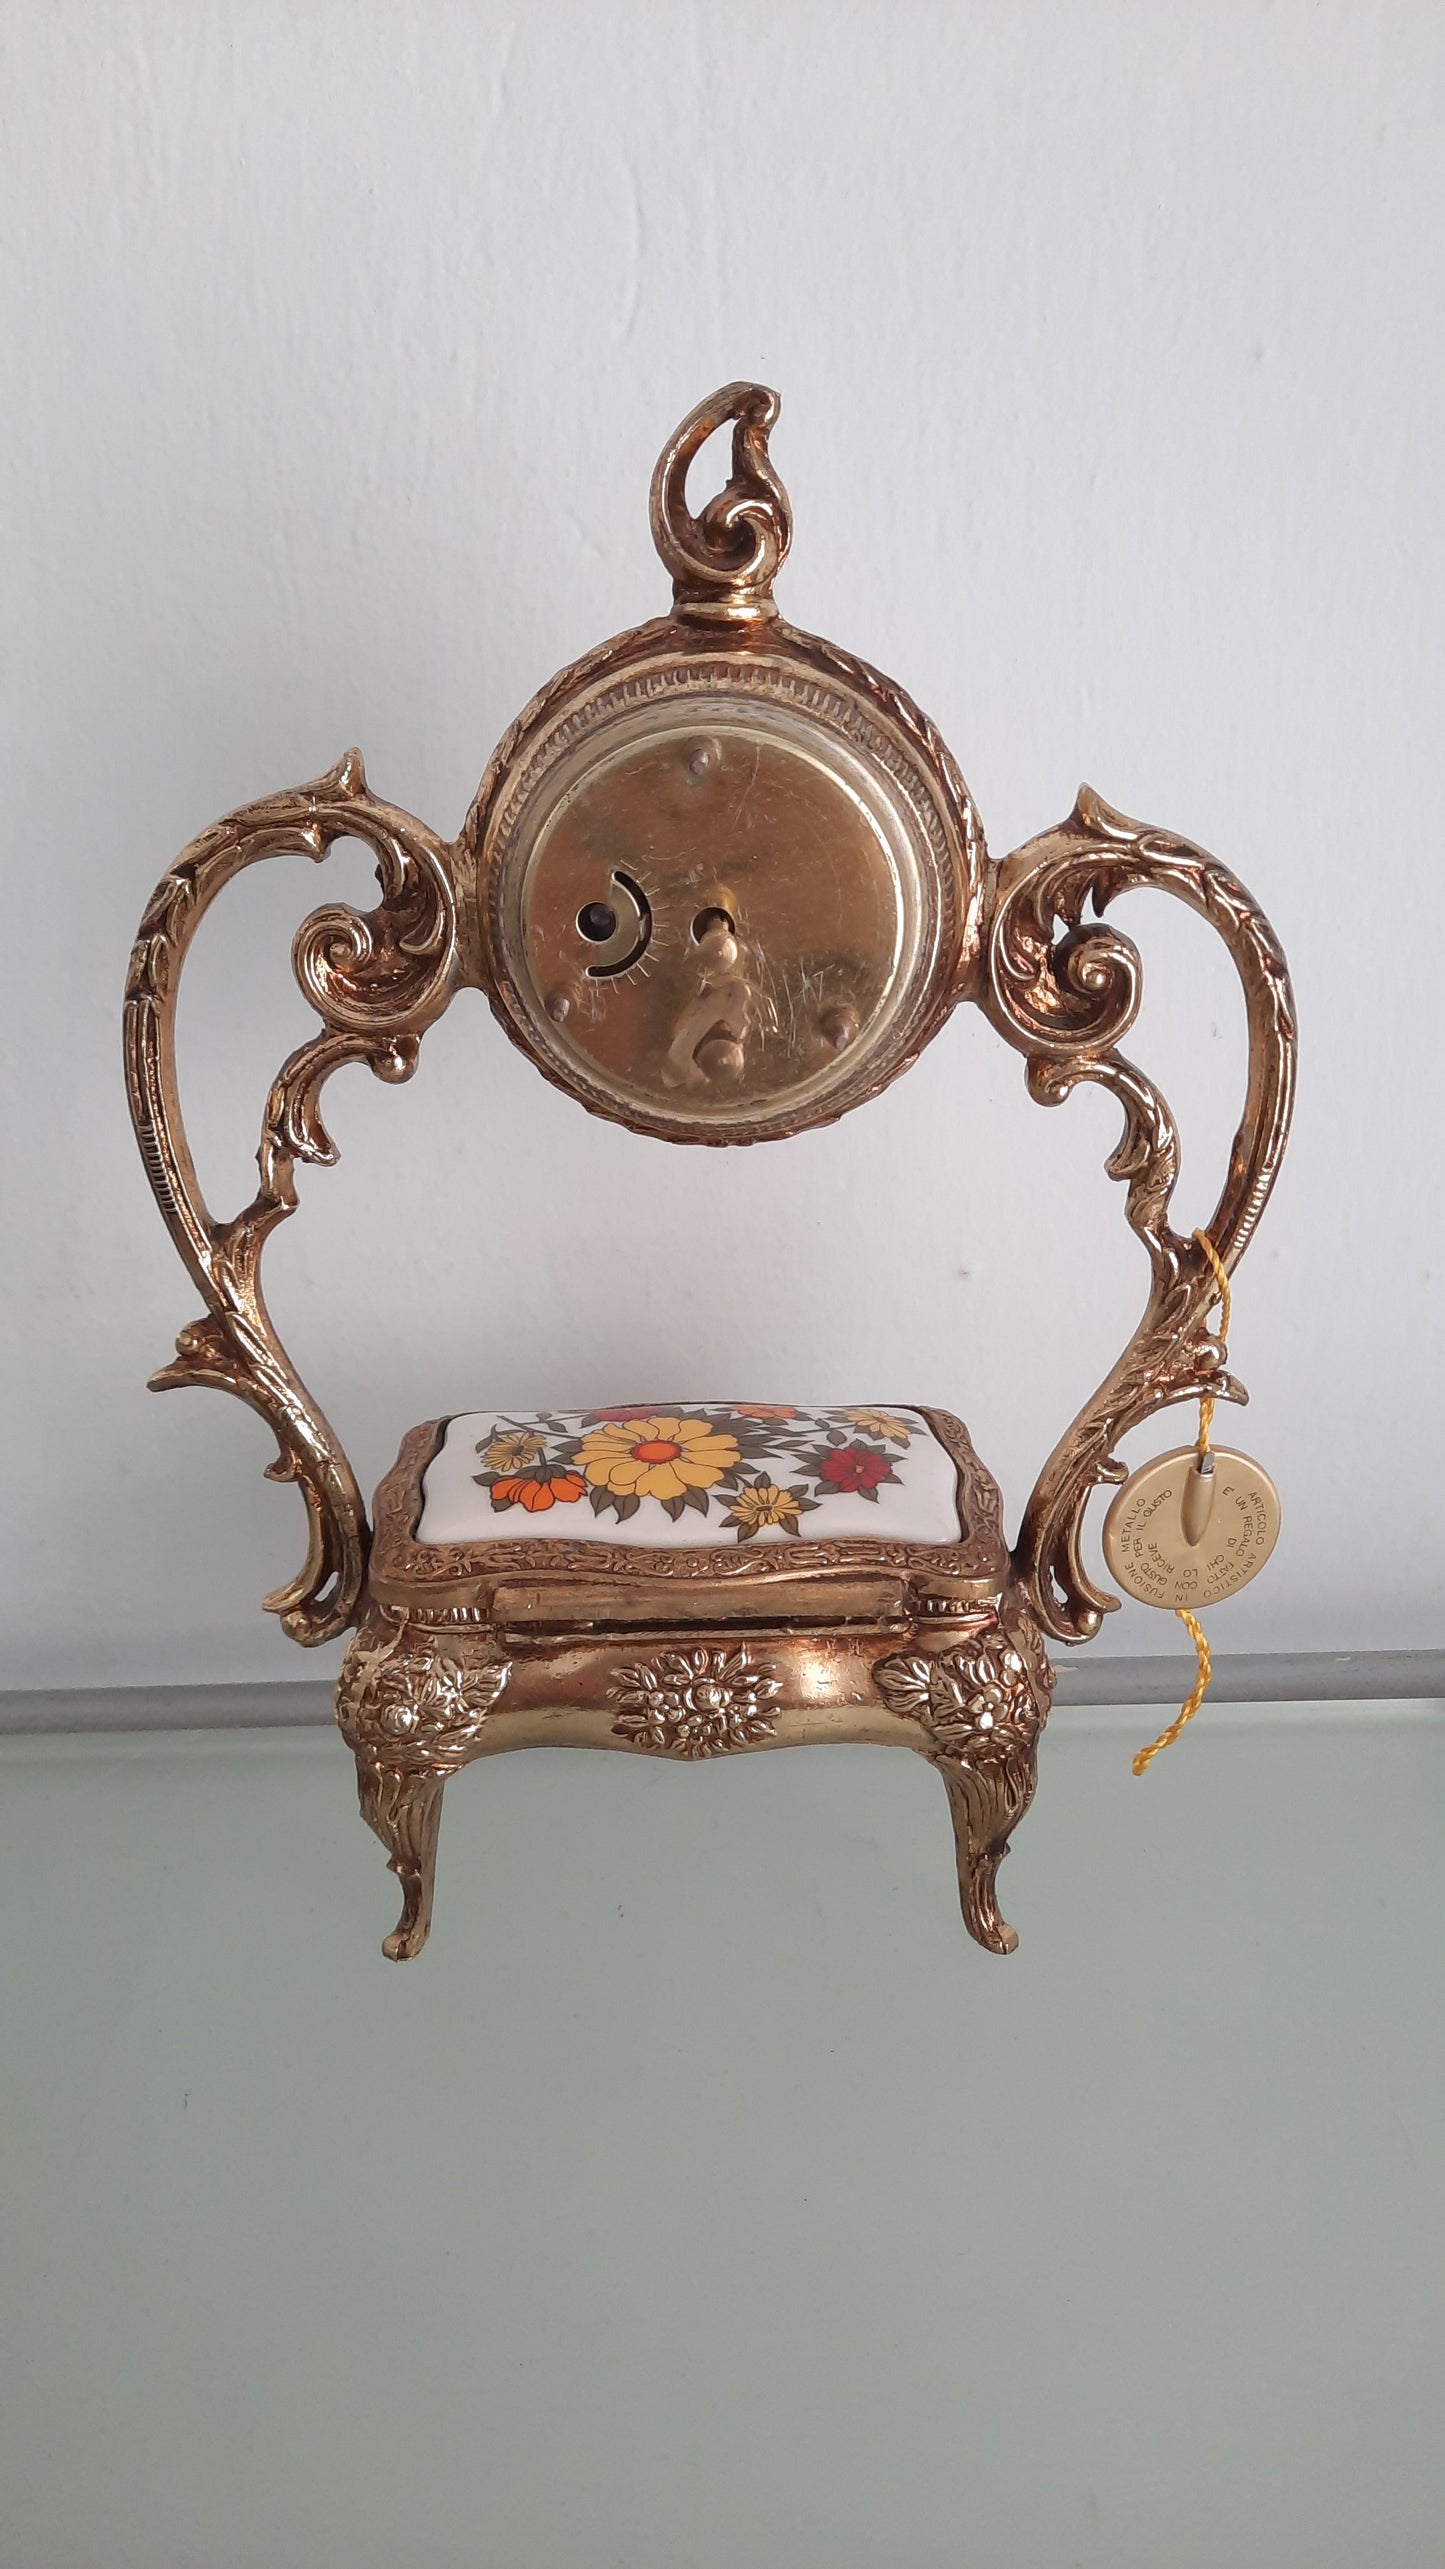 West Germany Antique Style Mantel Clock